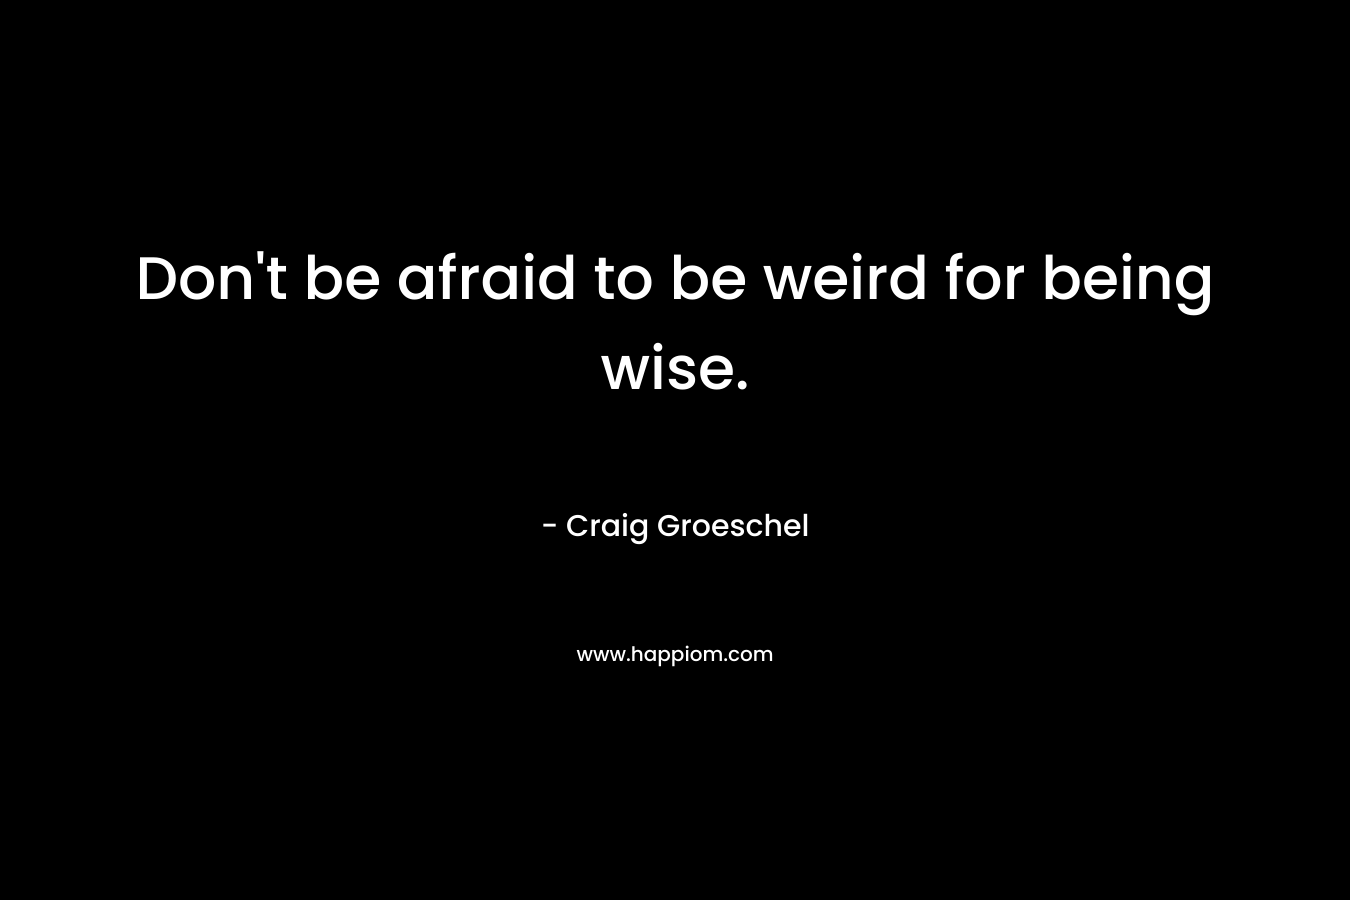 Don’t be afraid to be weird for being wise. – Craig Groeschel